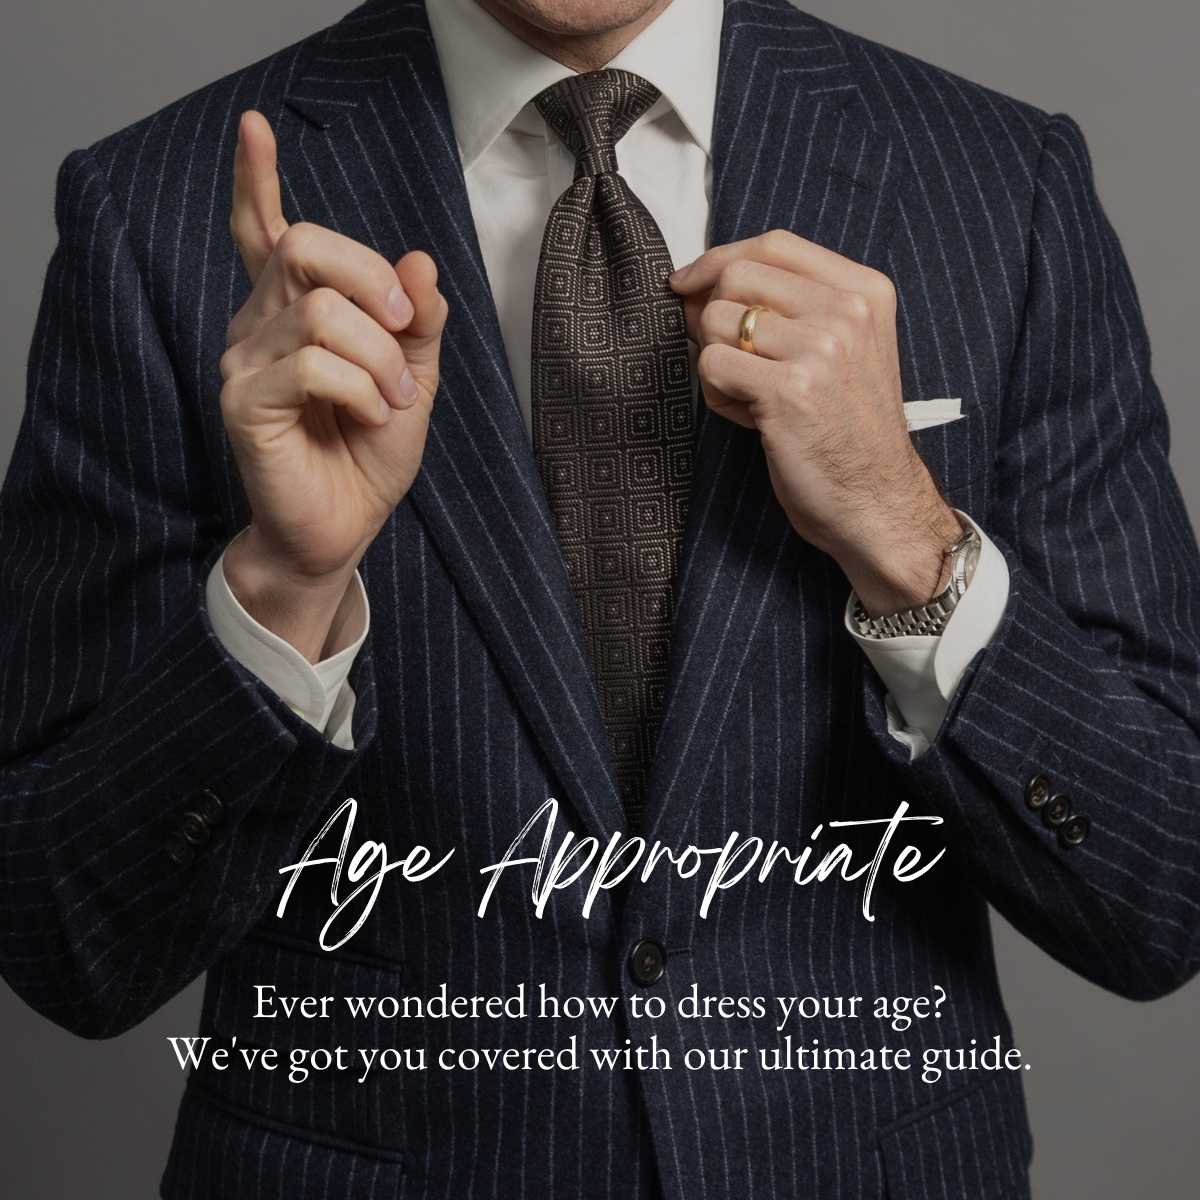 The Ultimate Guide to Dressing Your Age